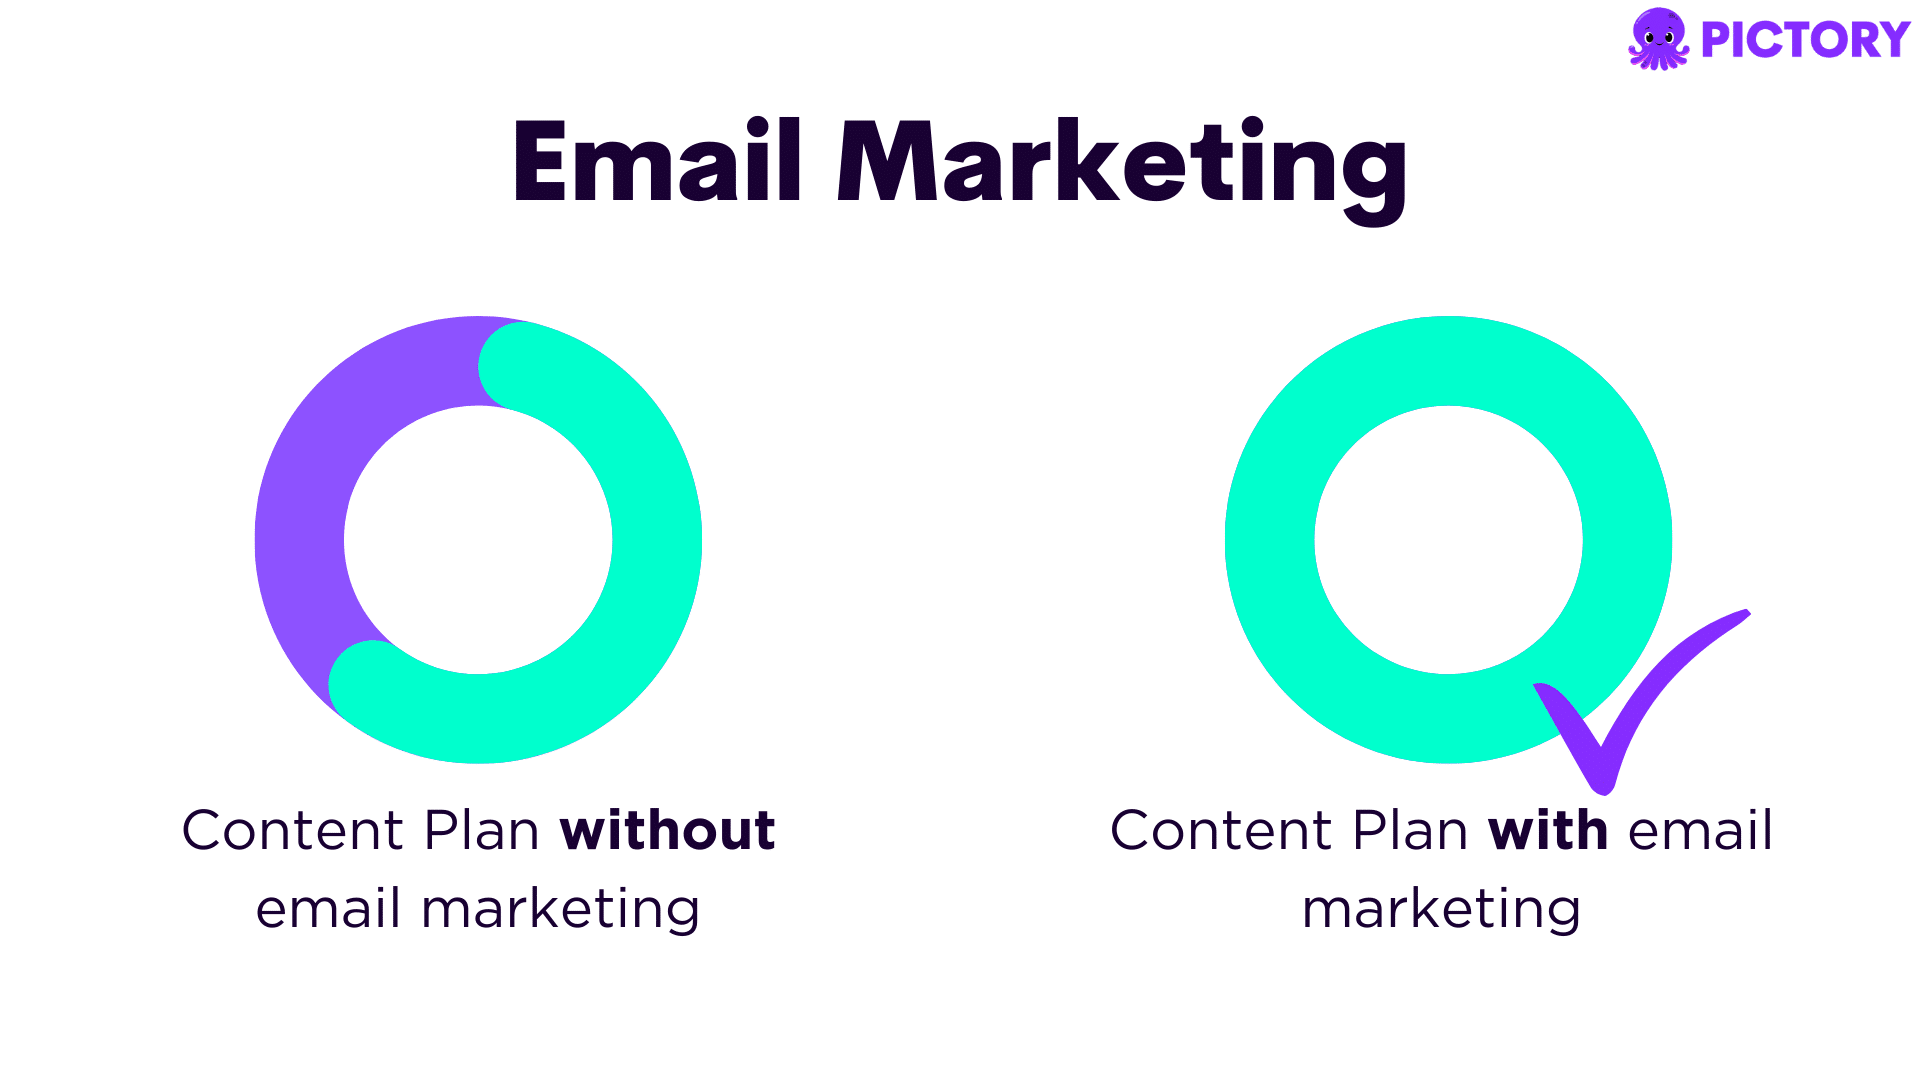 email marketing makes it highly effective for creating content that is personalized and targeted directly at users who have already shown interest in a business.